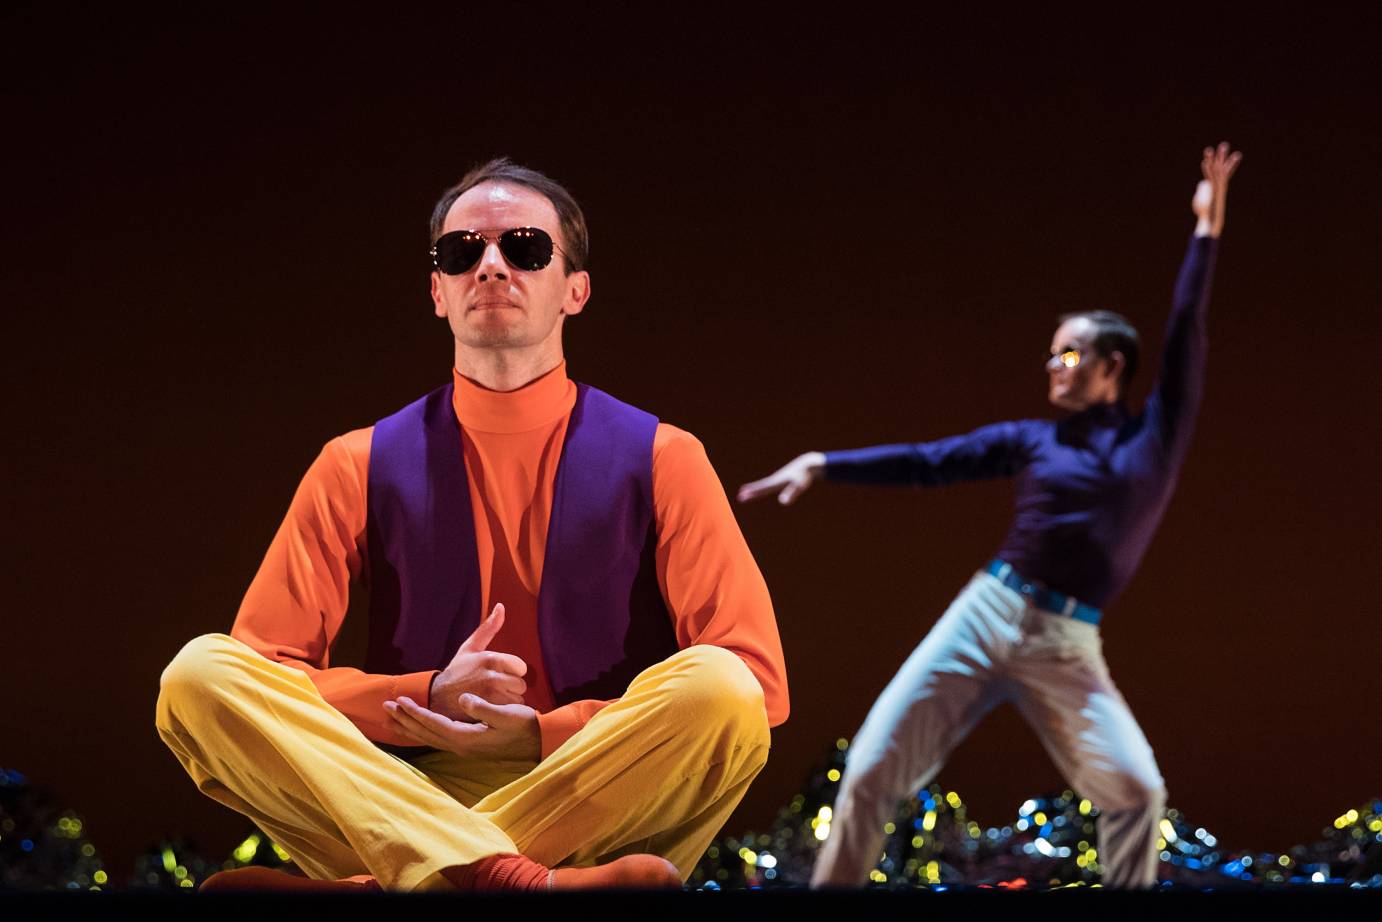 A man with sunglasses sits centerstage as others dance around him